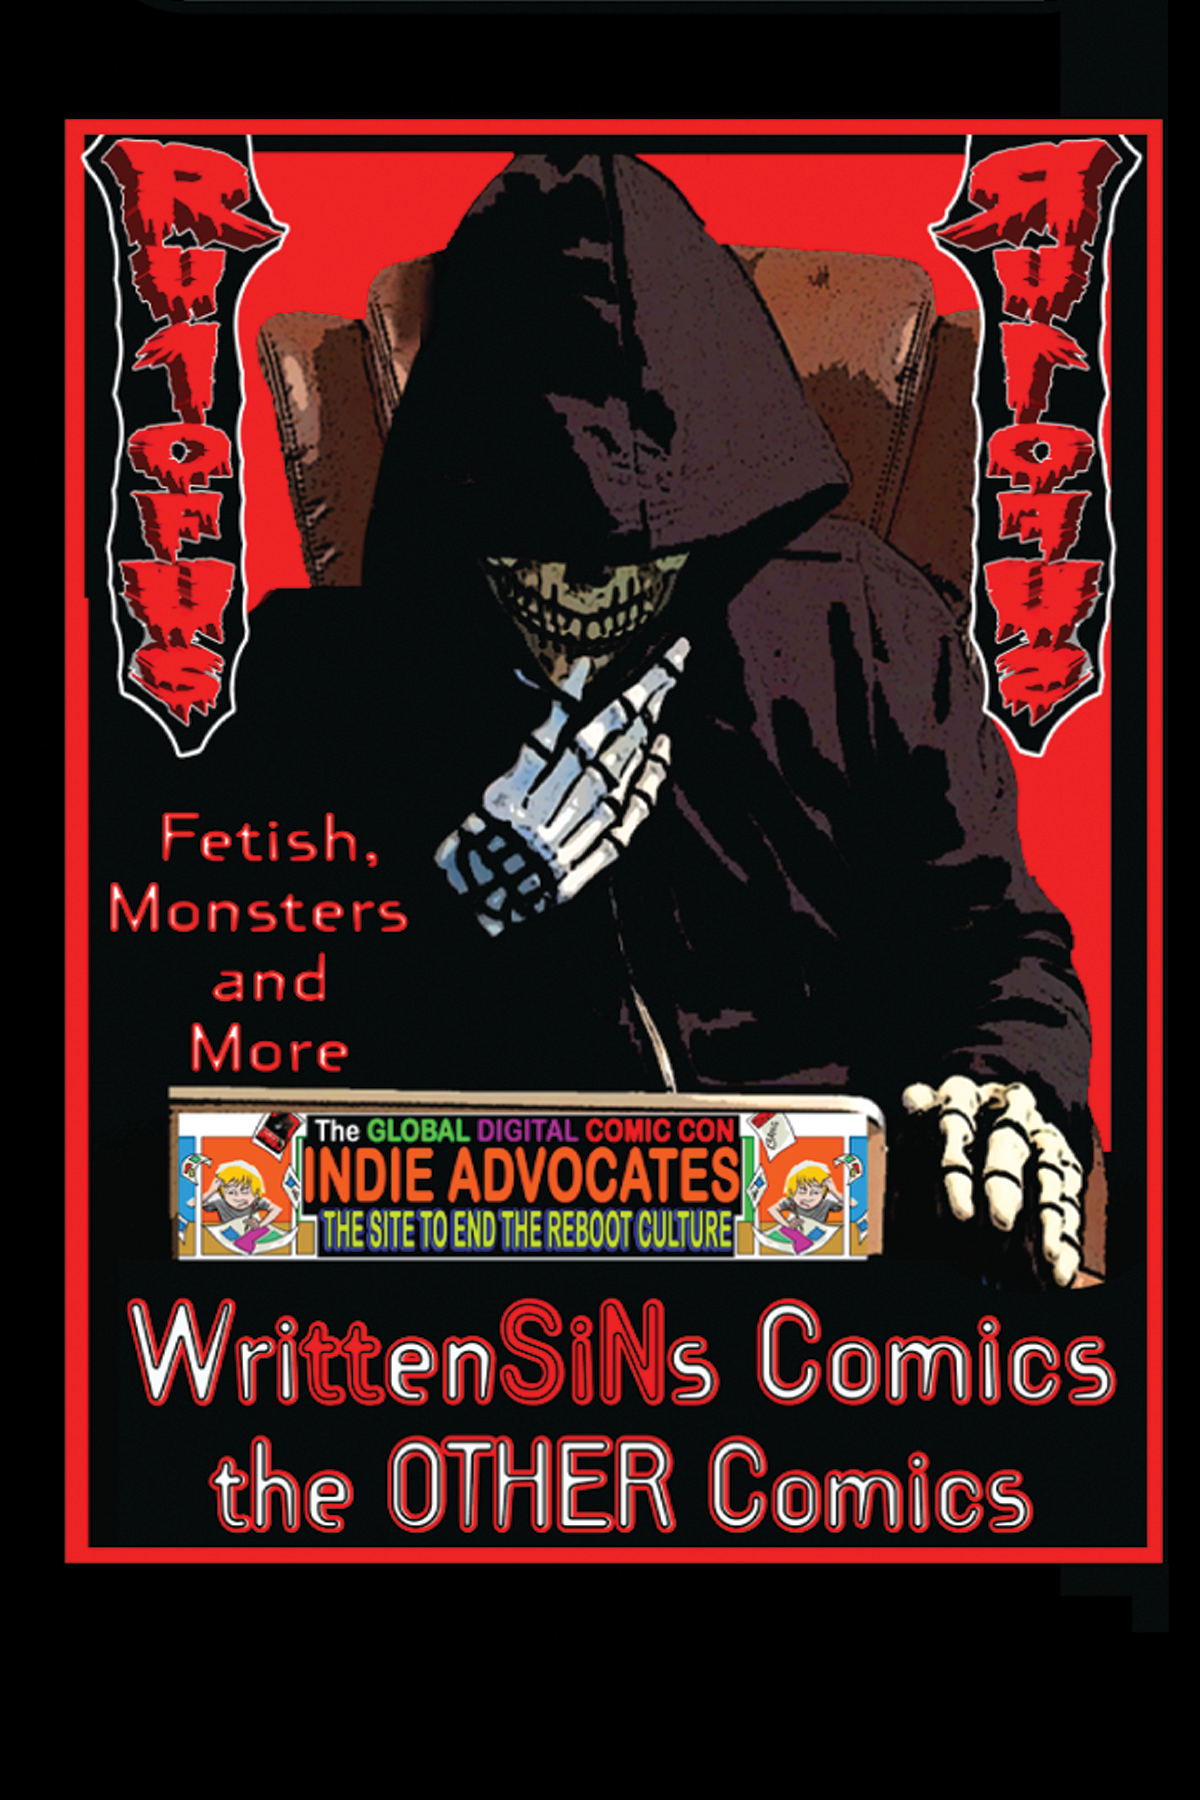 WrittenSiNS is BACK and is all about the 3 C’s:: Creator Created Comics, Comics will Never be the Same